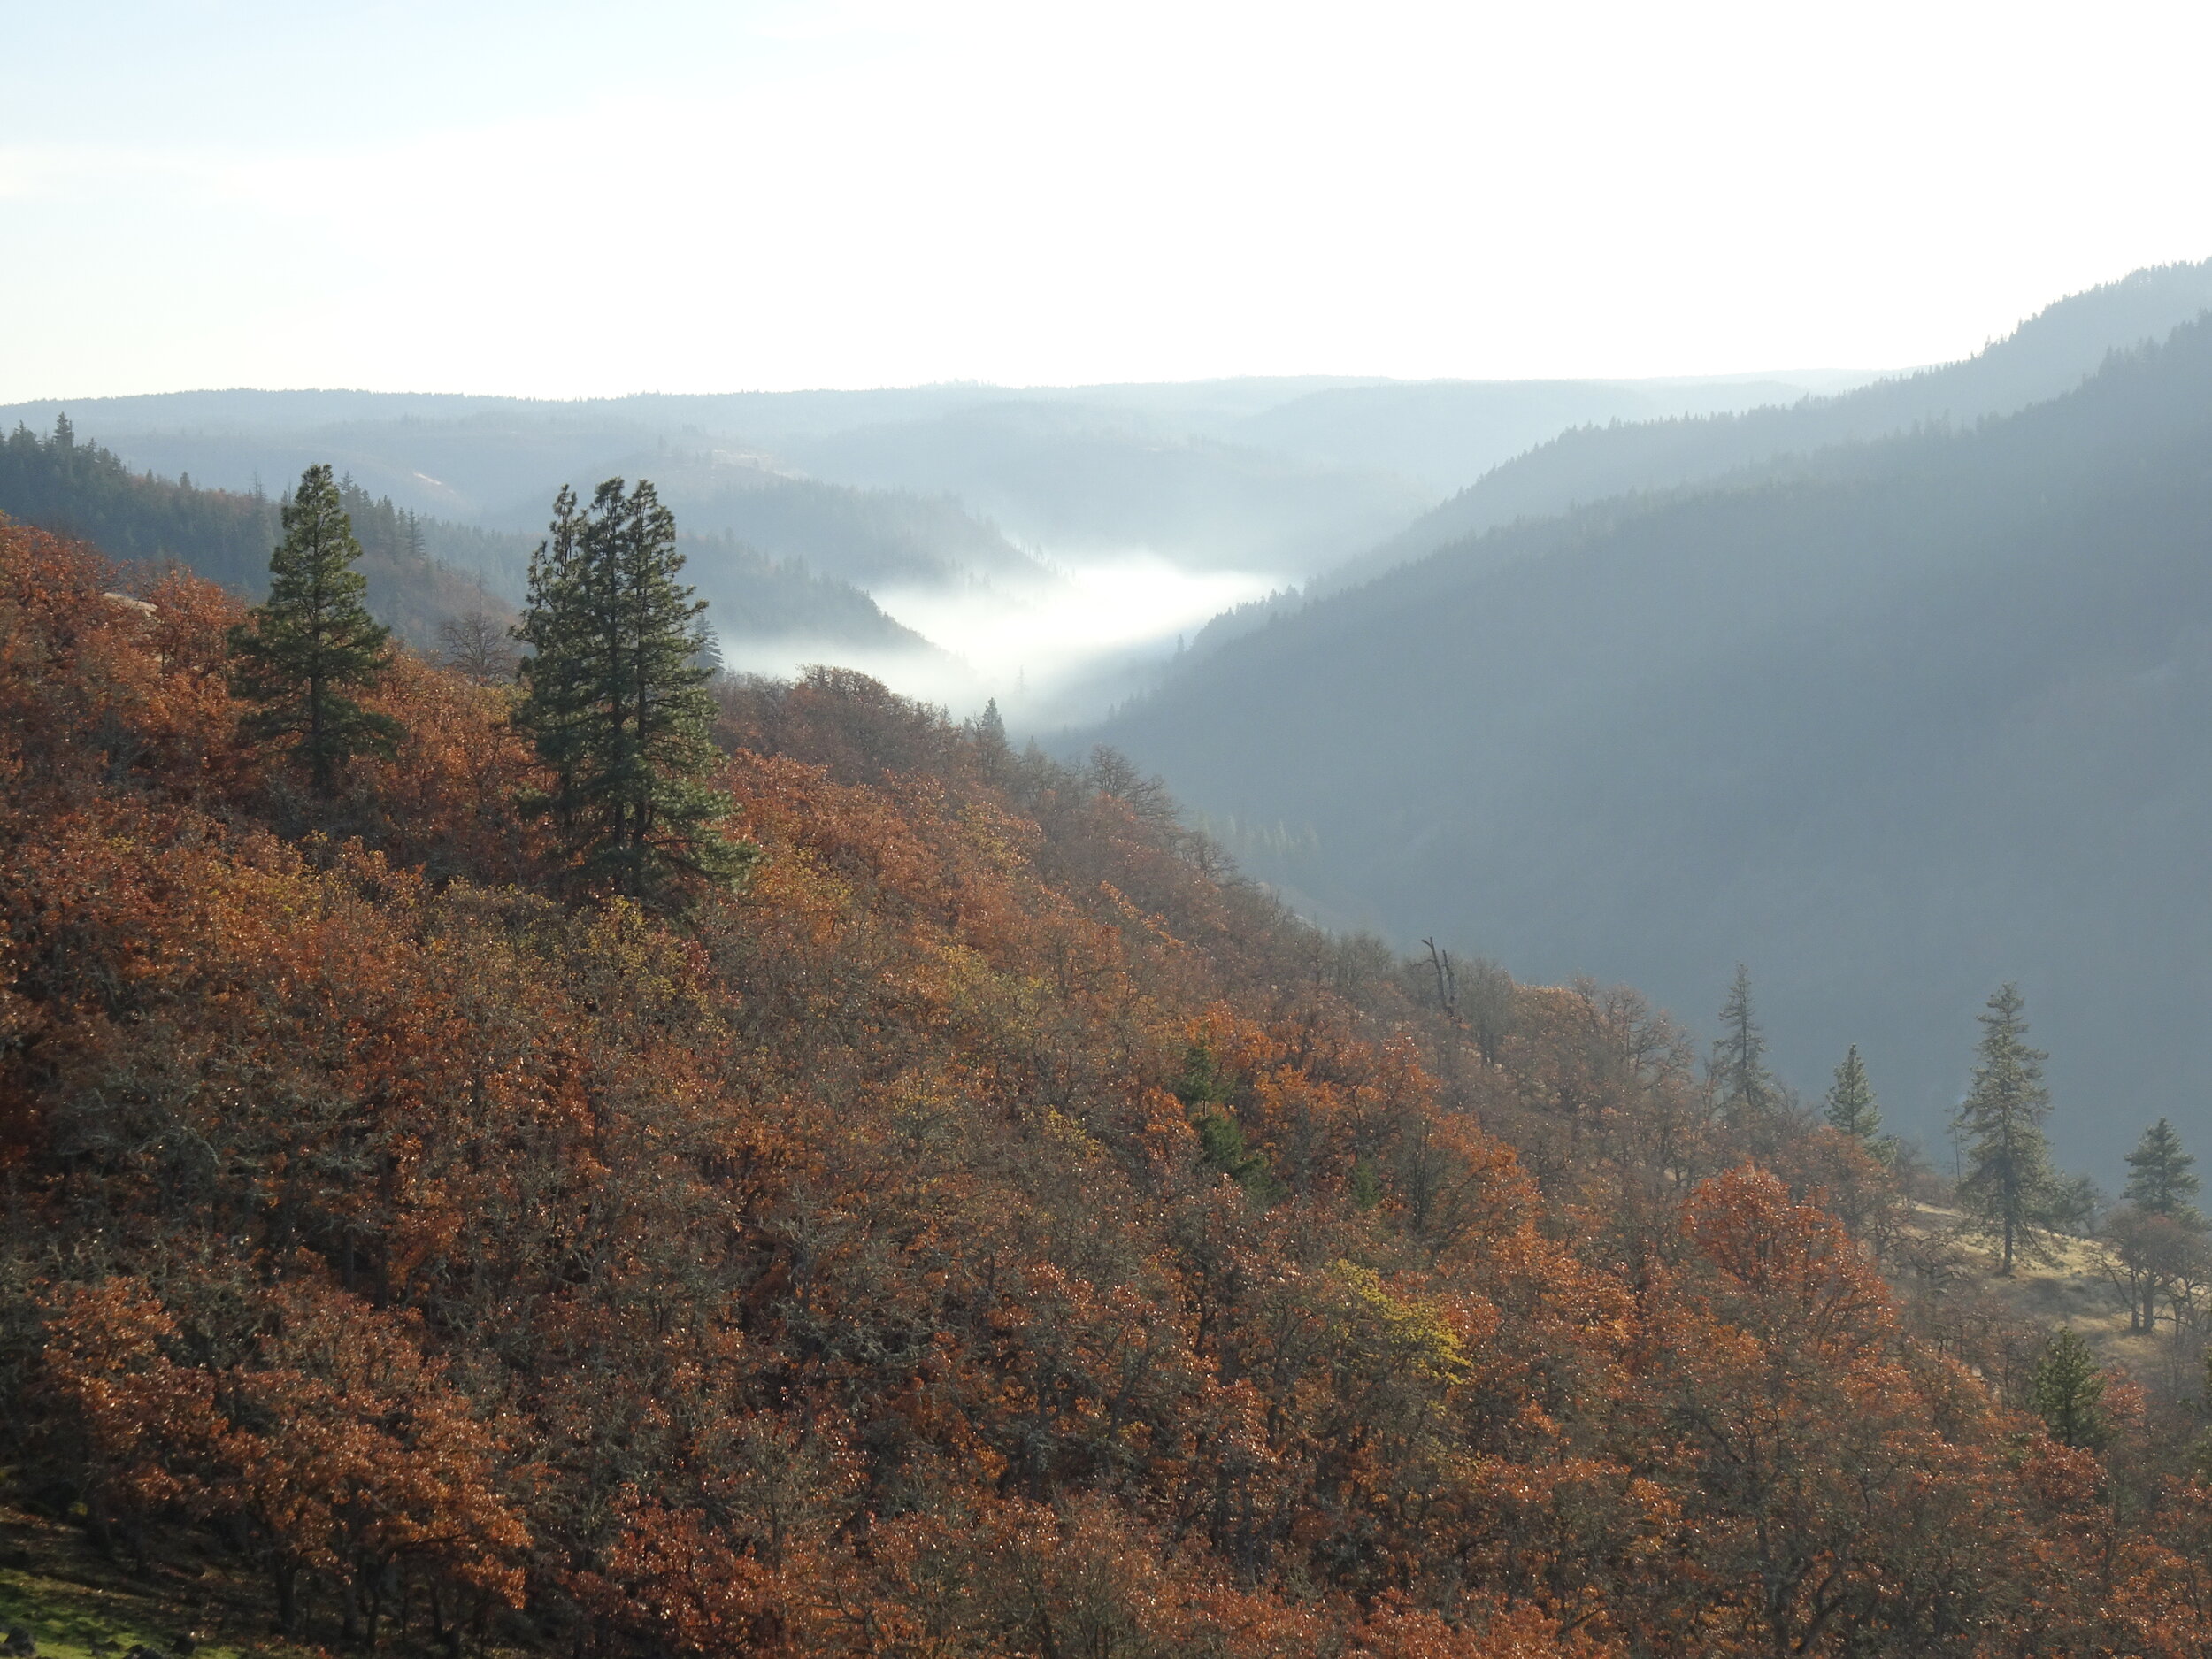  View of Mist in Mosier Creek Canyon